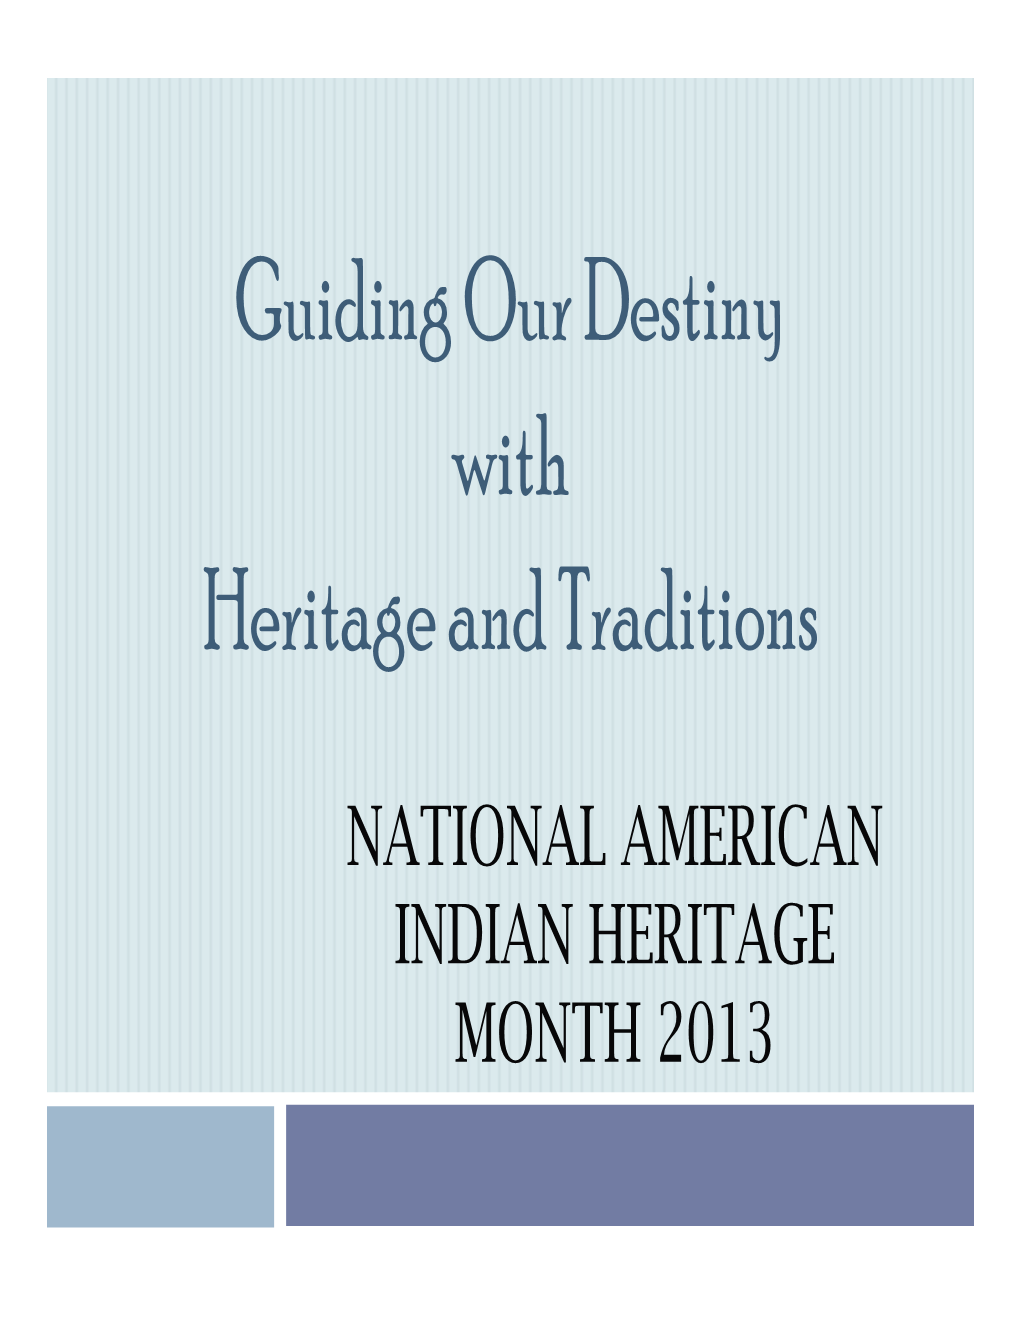 Guiding Our Destiny with Heritage and Traditions